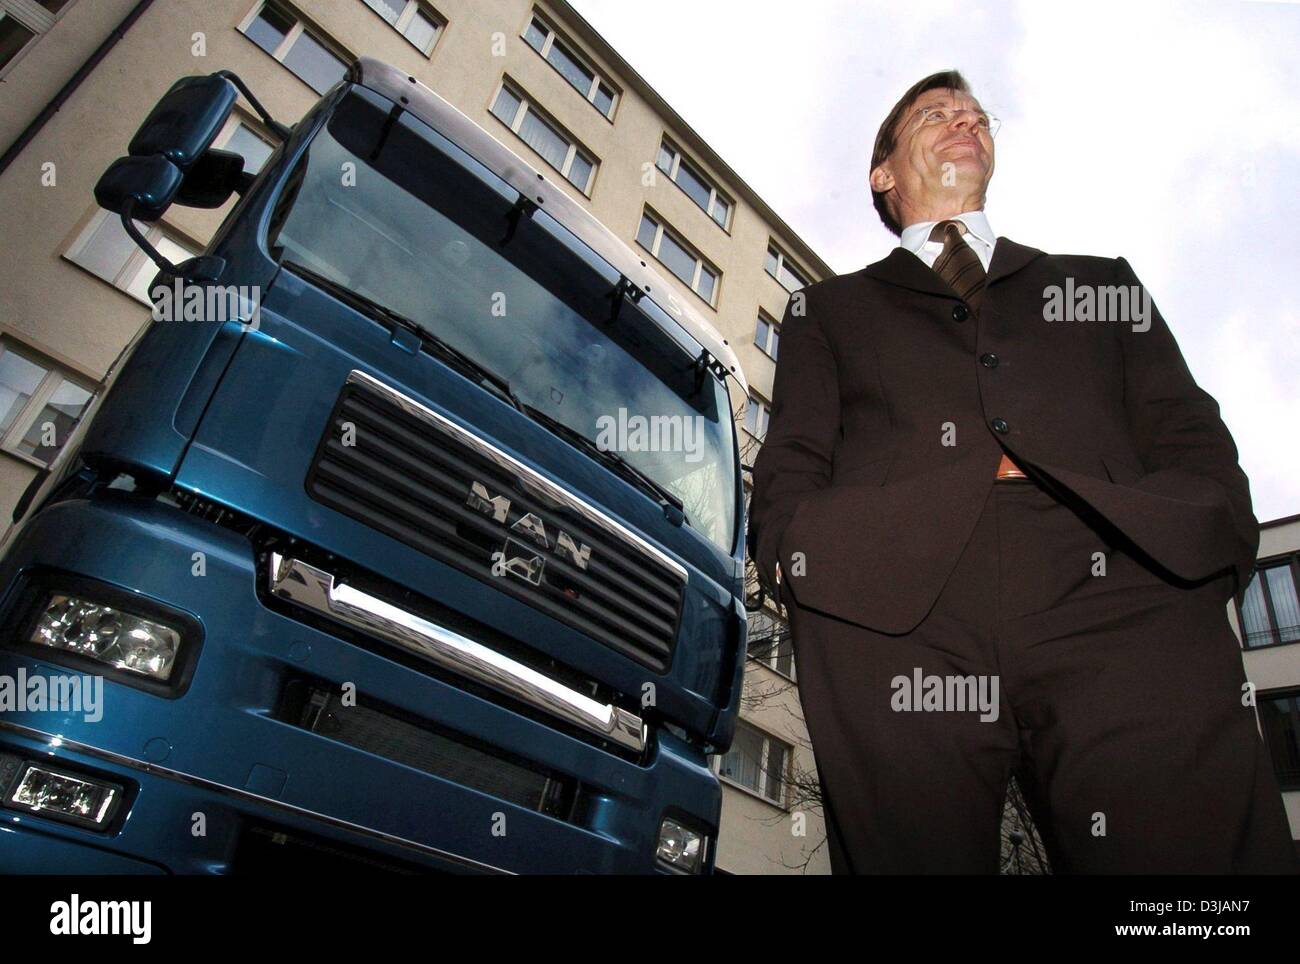 (dpa) - Hakan Samuelsson, chairman of MAN Nutzfahrzeuge AG German manufacturer of commercial vehicles, stands in front of a MAN TGA 18.430 truck before the start of the balance press conference in Munich, Germany, 22 March 2004.The company expects a revival in the commcerical vehicle business and an increase in turnover of more than five percent in the 2004 business year. The compa Stock Photo